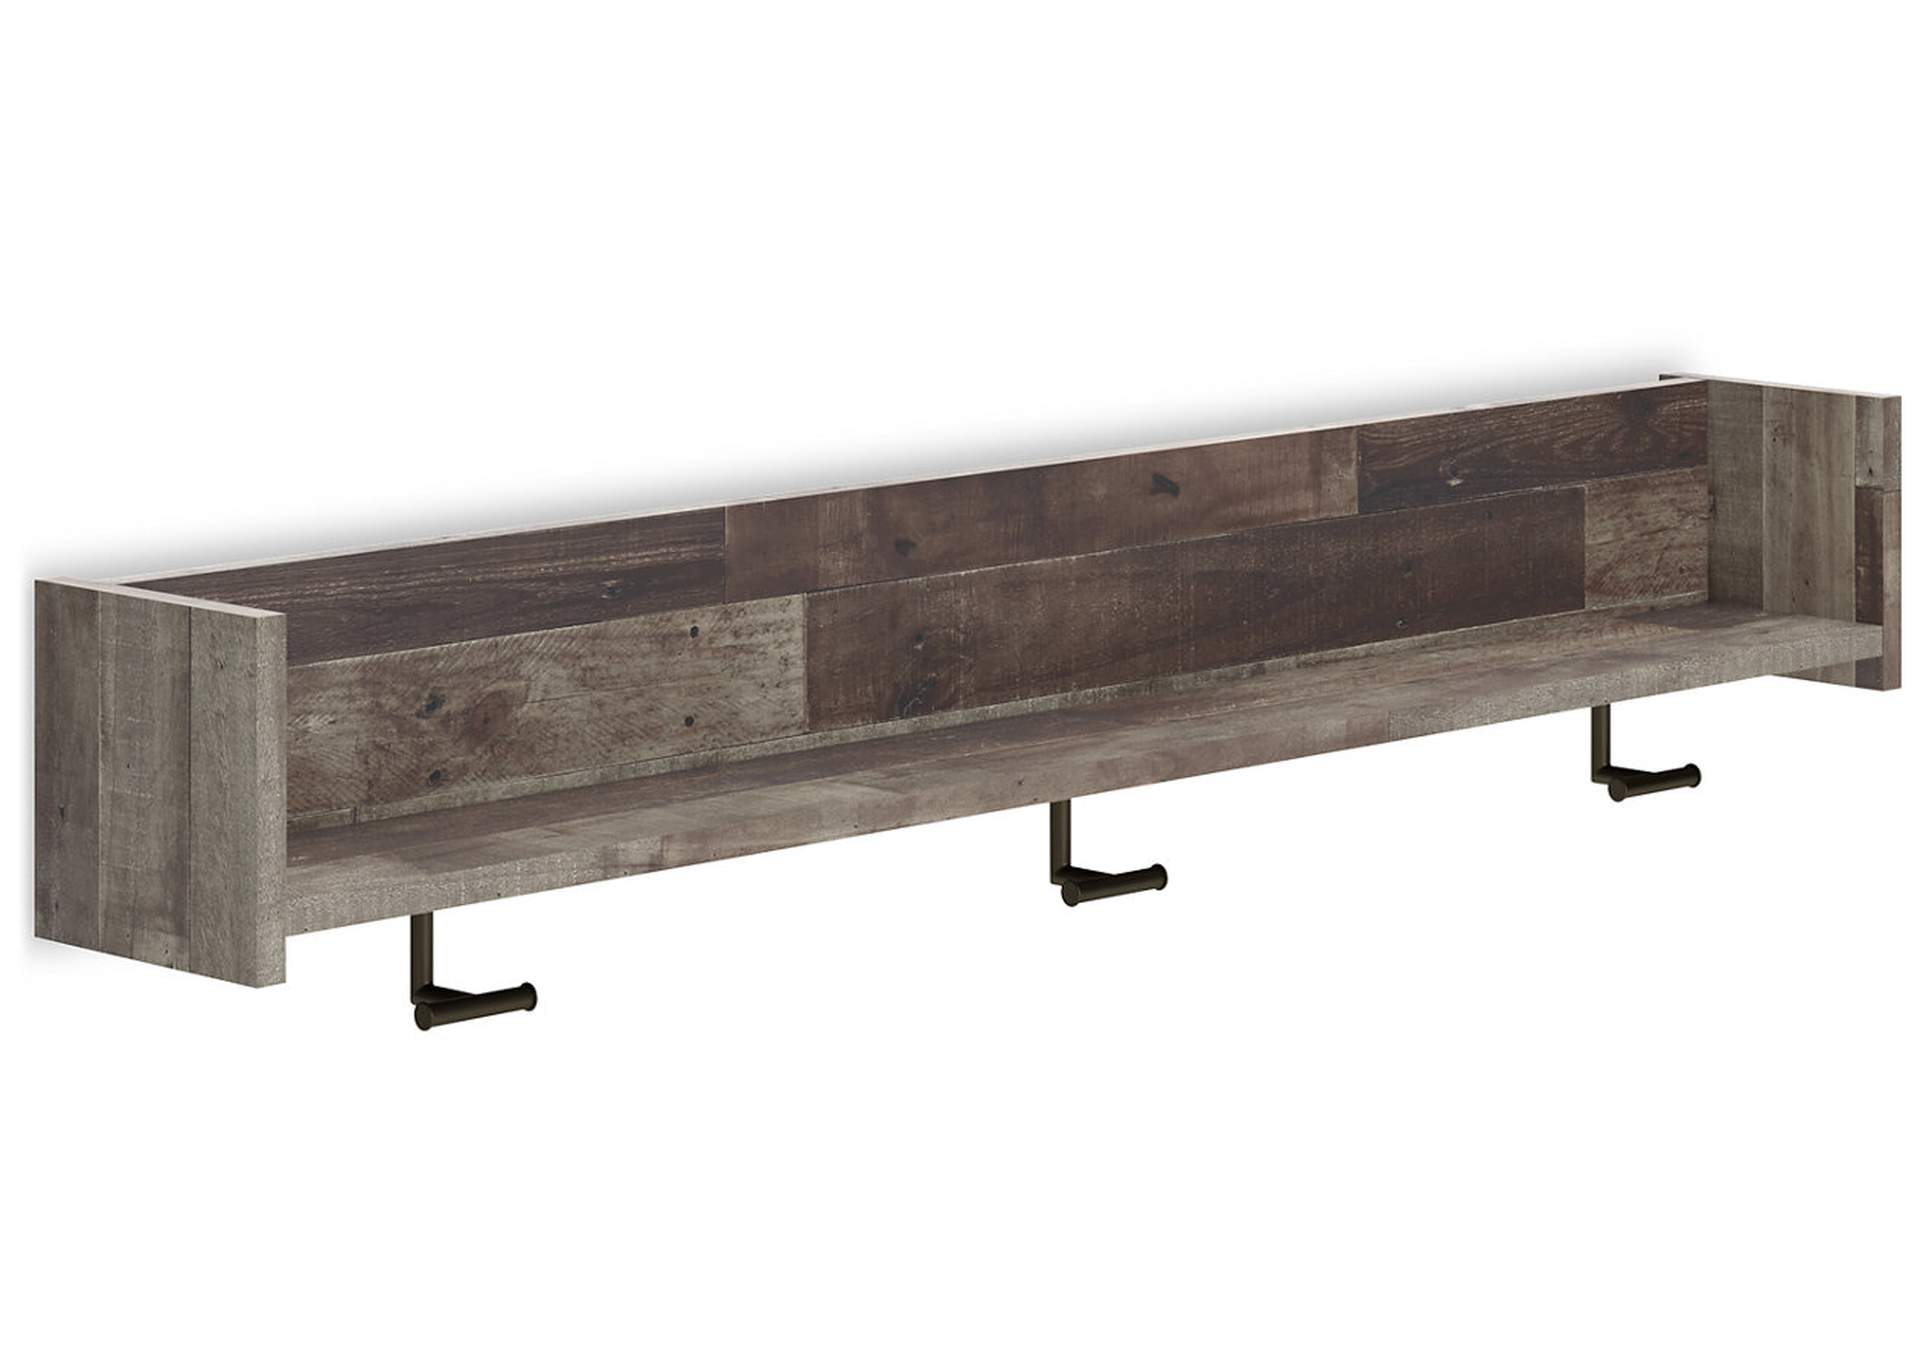 Neilsville Wall Mounted Coat Rack with Shelf,Signature Design By Ashley